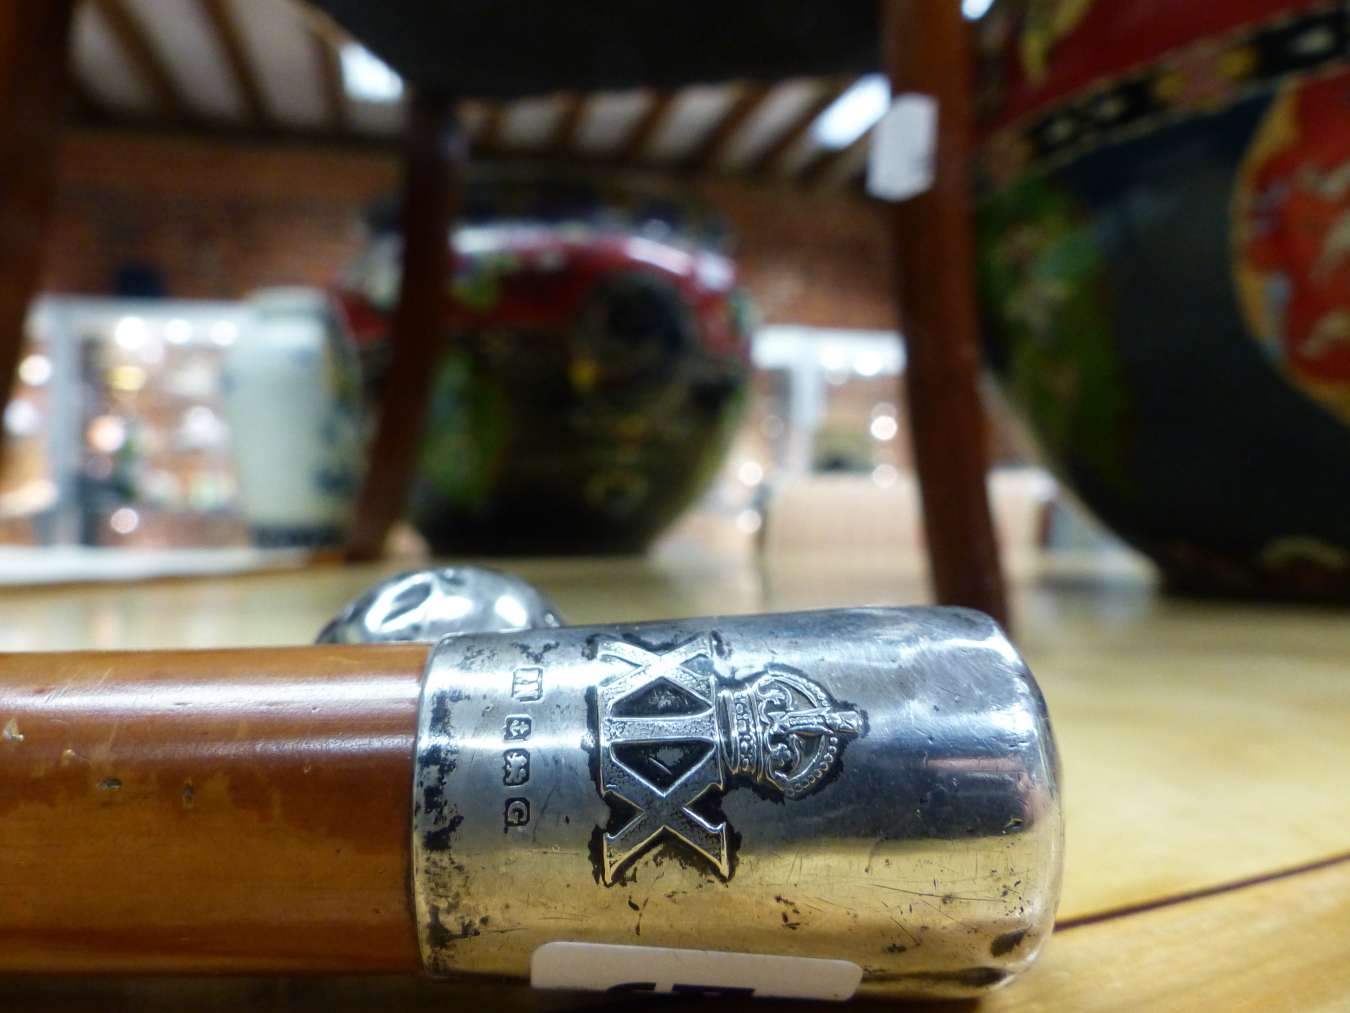 A SILVER MOUNTED SWAGGER STICK, BIRMINGHAM 1931 WITH A CROWN OVER XIX IN RELIEF, POSSIBLY FOR THE - Image 4 of 5